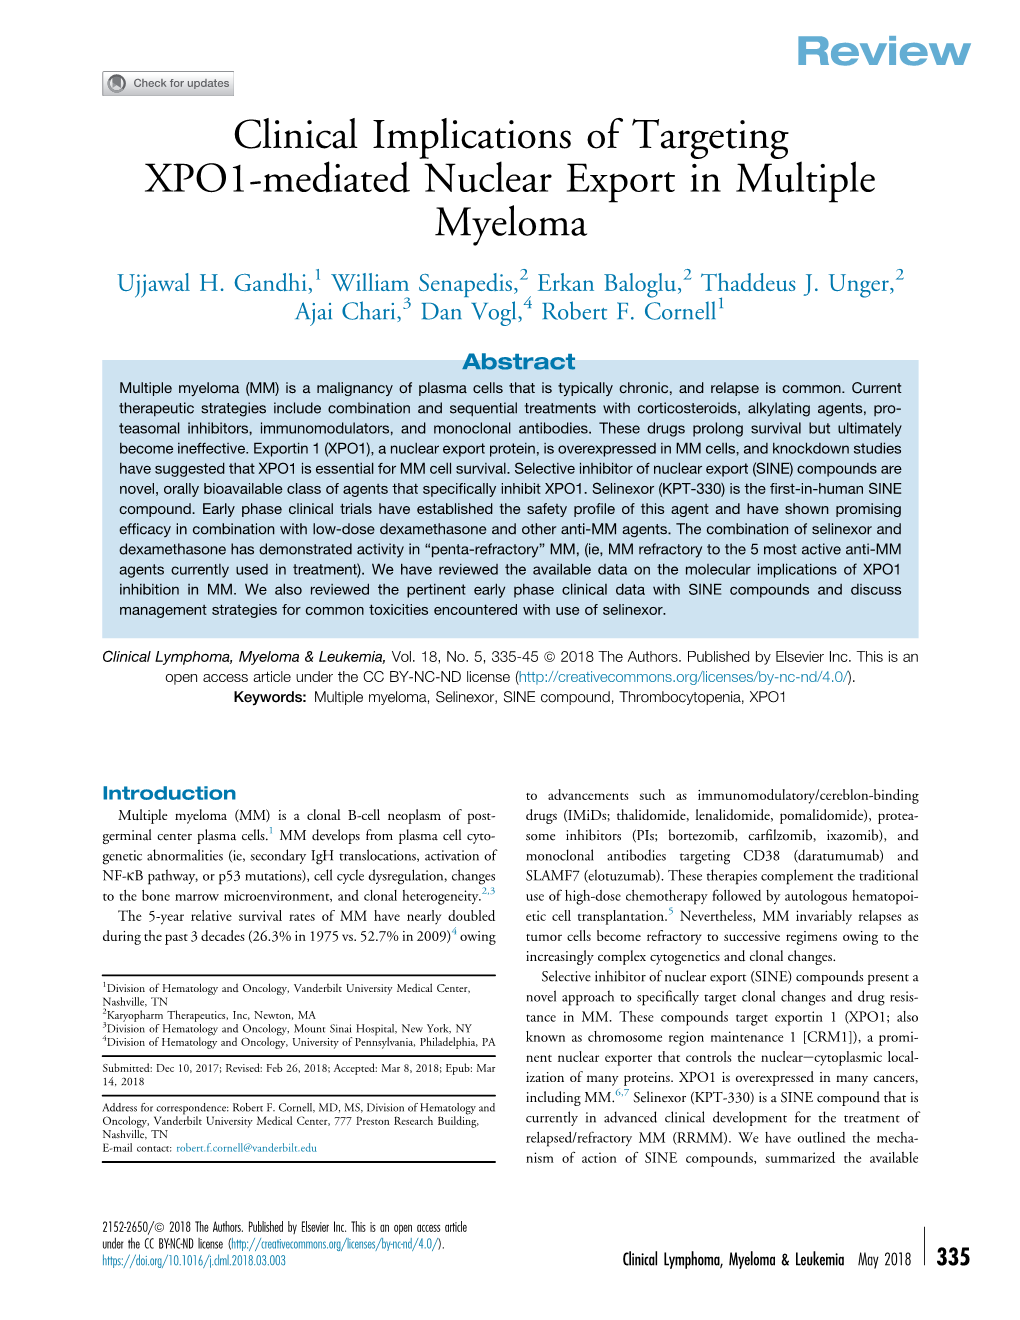 Clinical Implications of Targeting XPO1-Mediated Nuclear Export in Multiple Myeloma